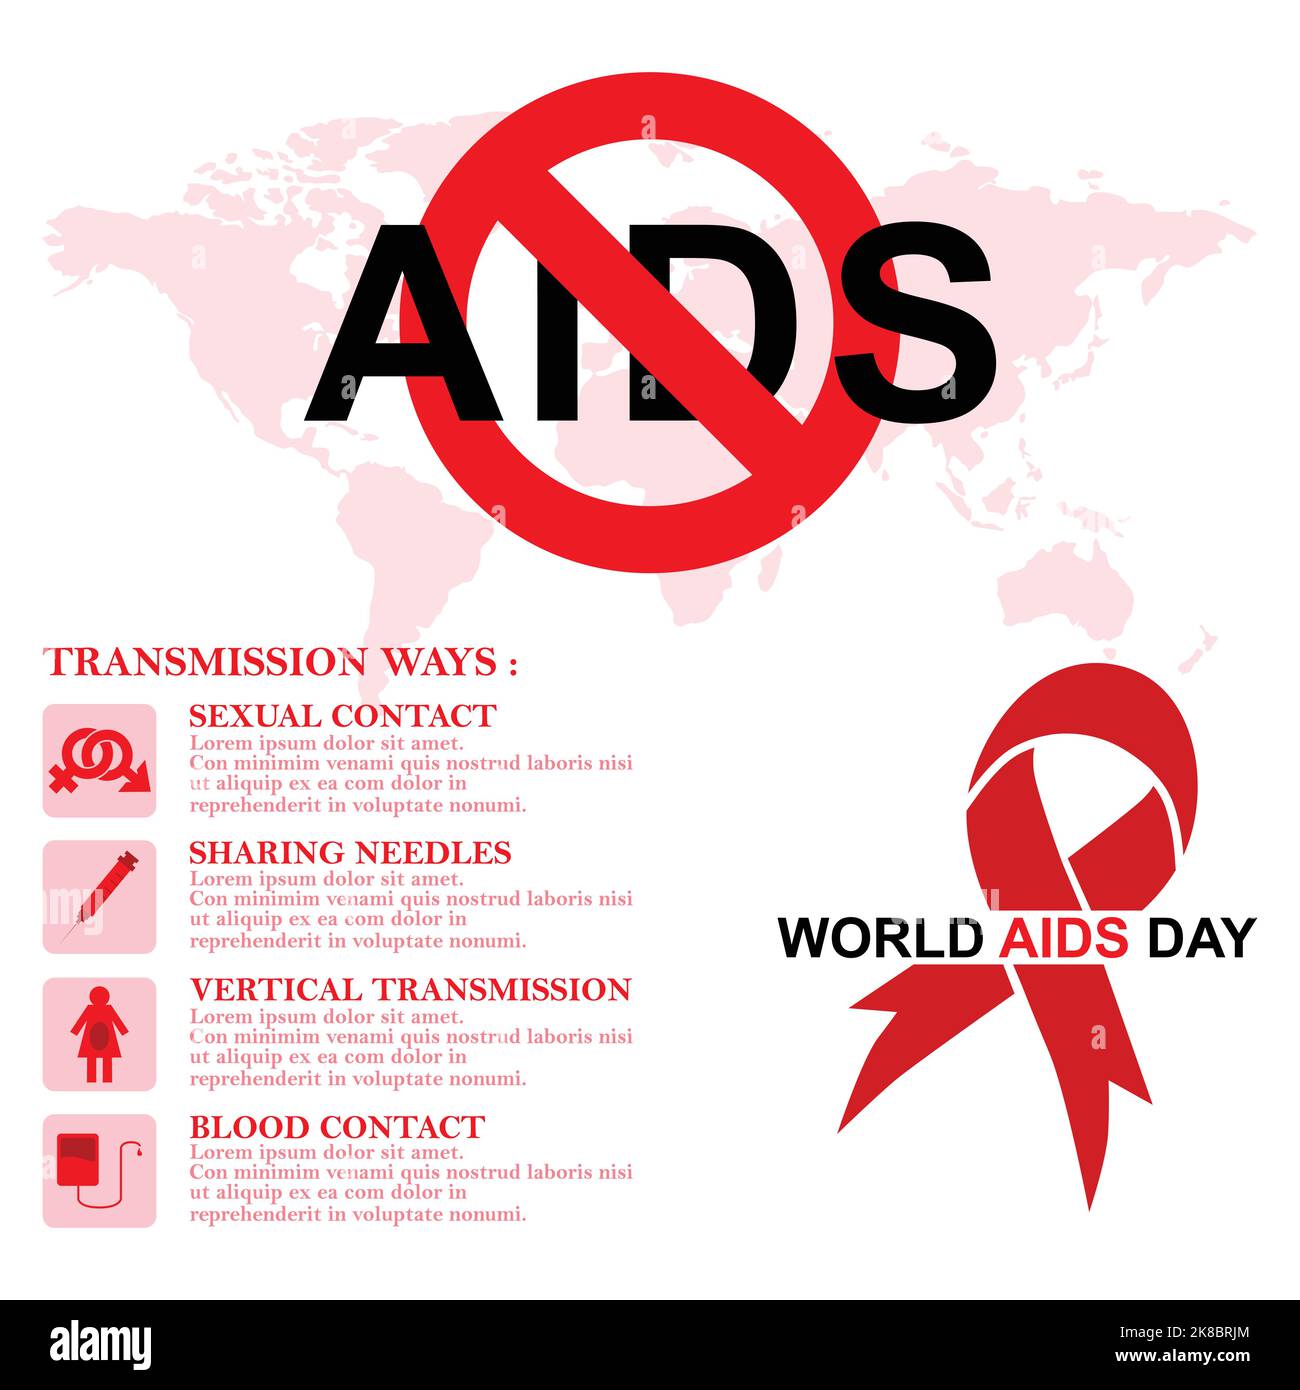 Hiv and aids transmission ways poster Stock Vector